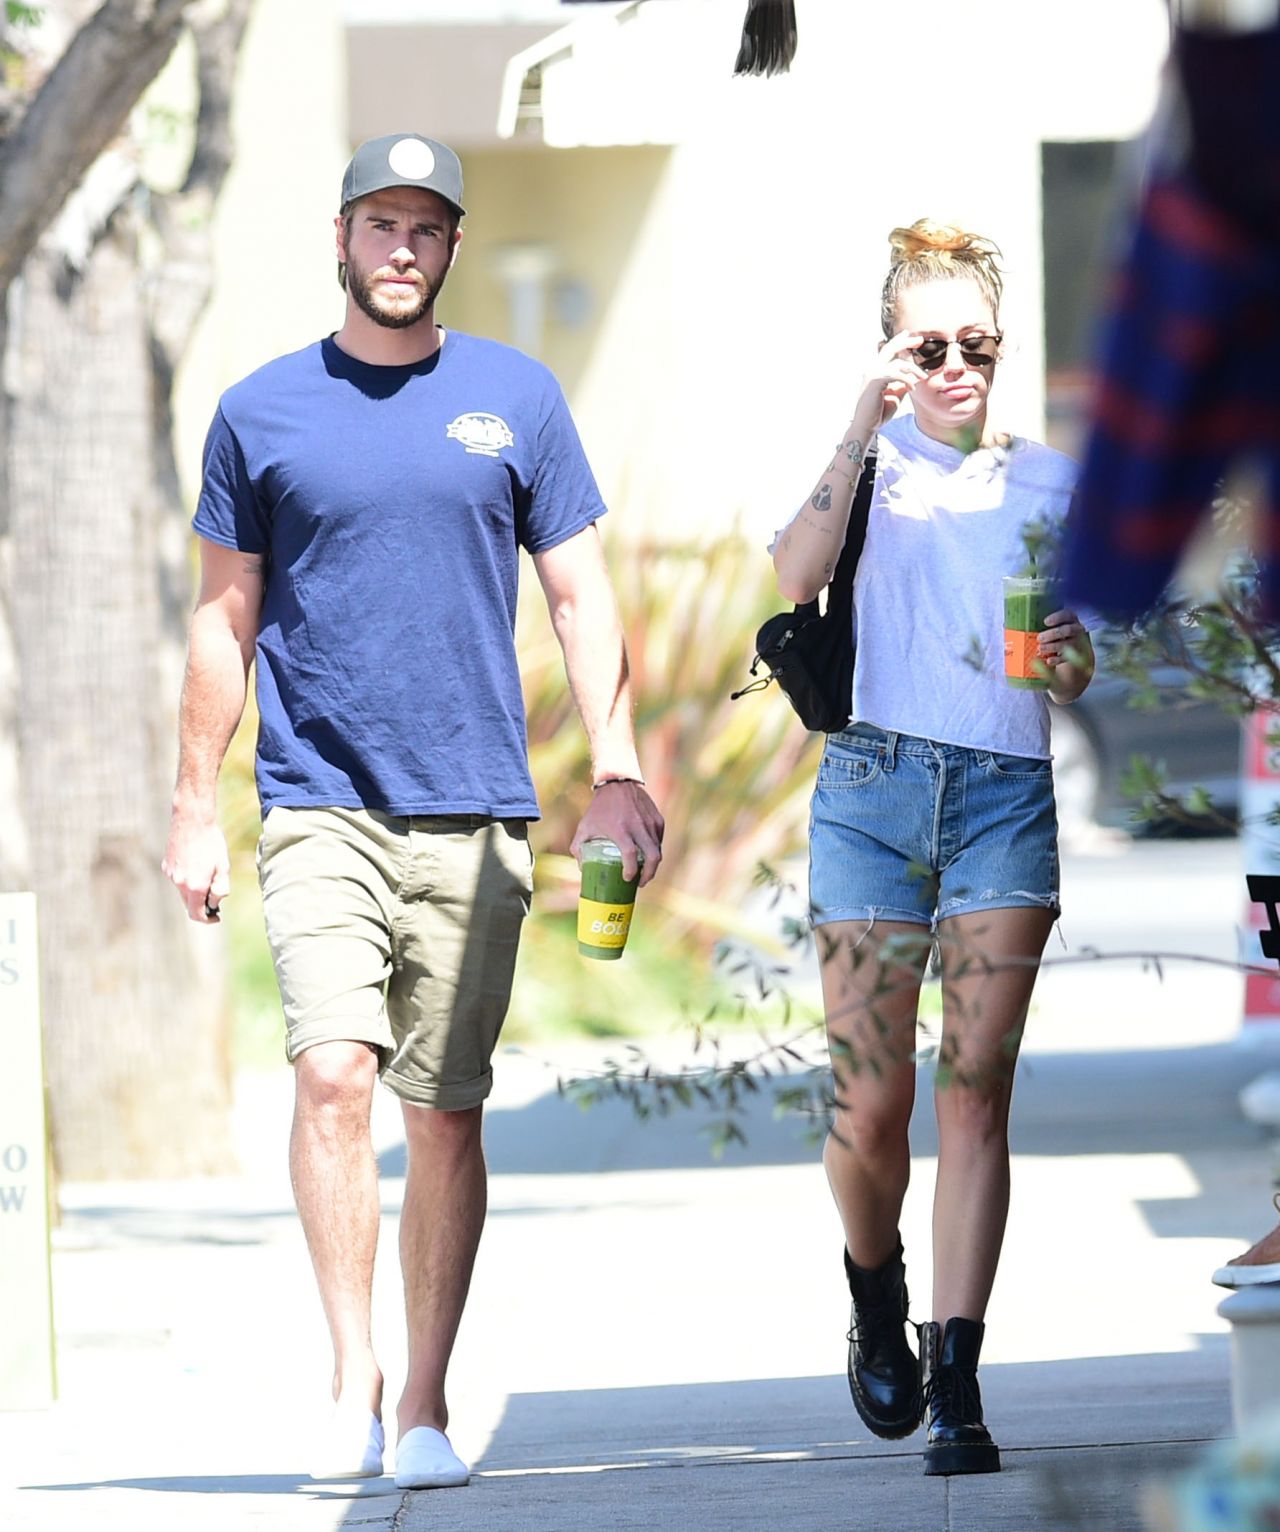 miley-cyrus-and-liam-hemsworth-at-alfred-s-in-studio-city-06-20-2018-3.jpg